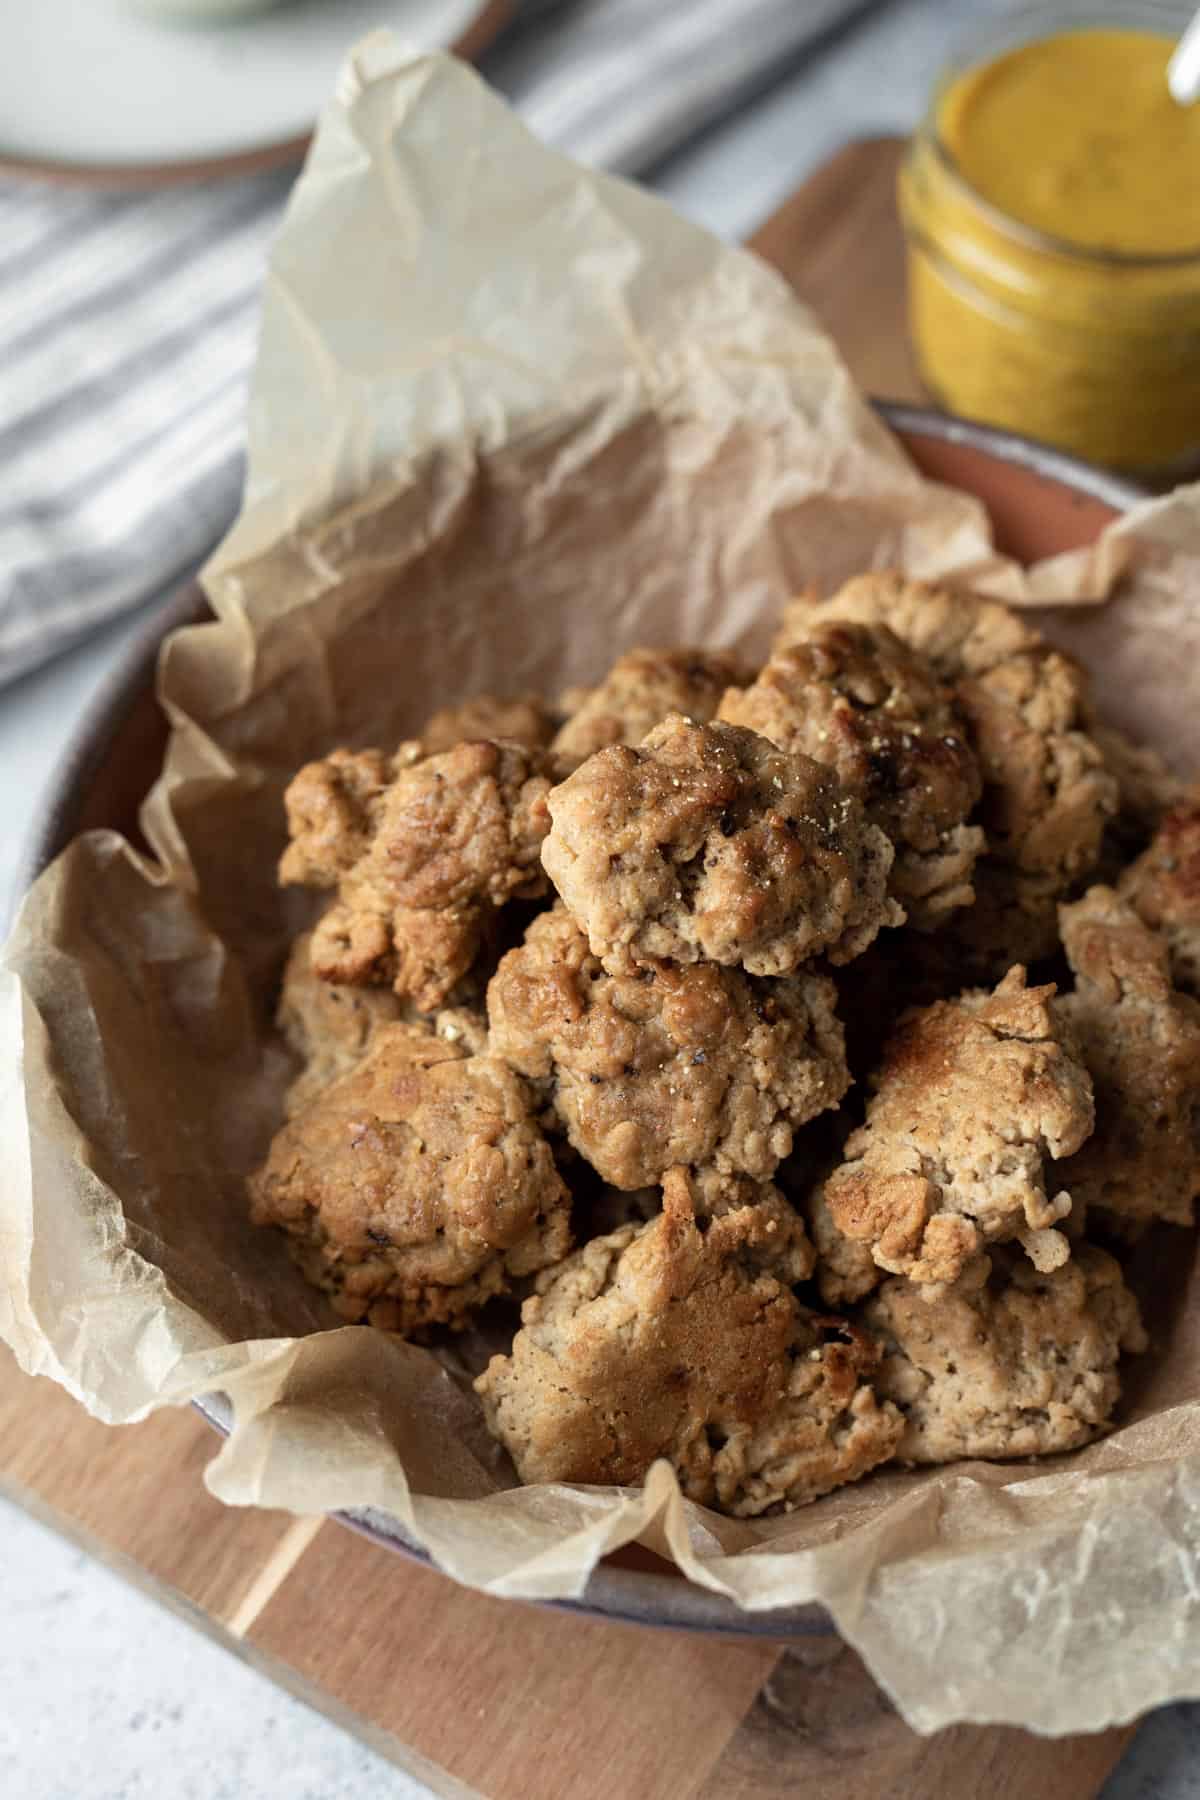 plain seitan nuggets after cooking in the Instant Pot.